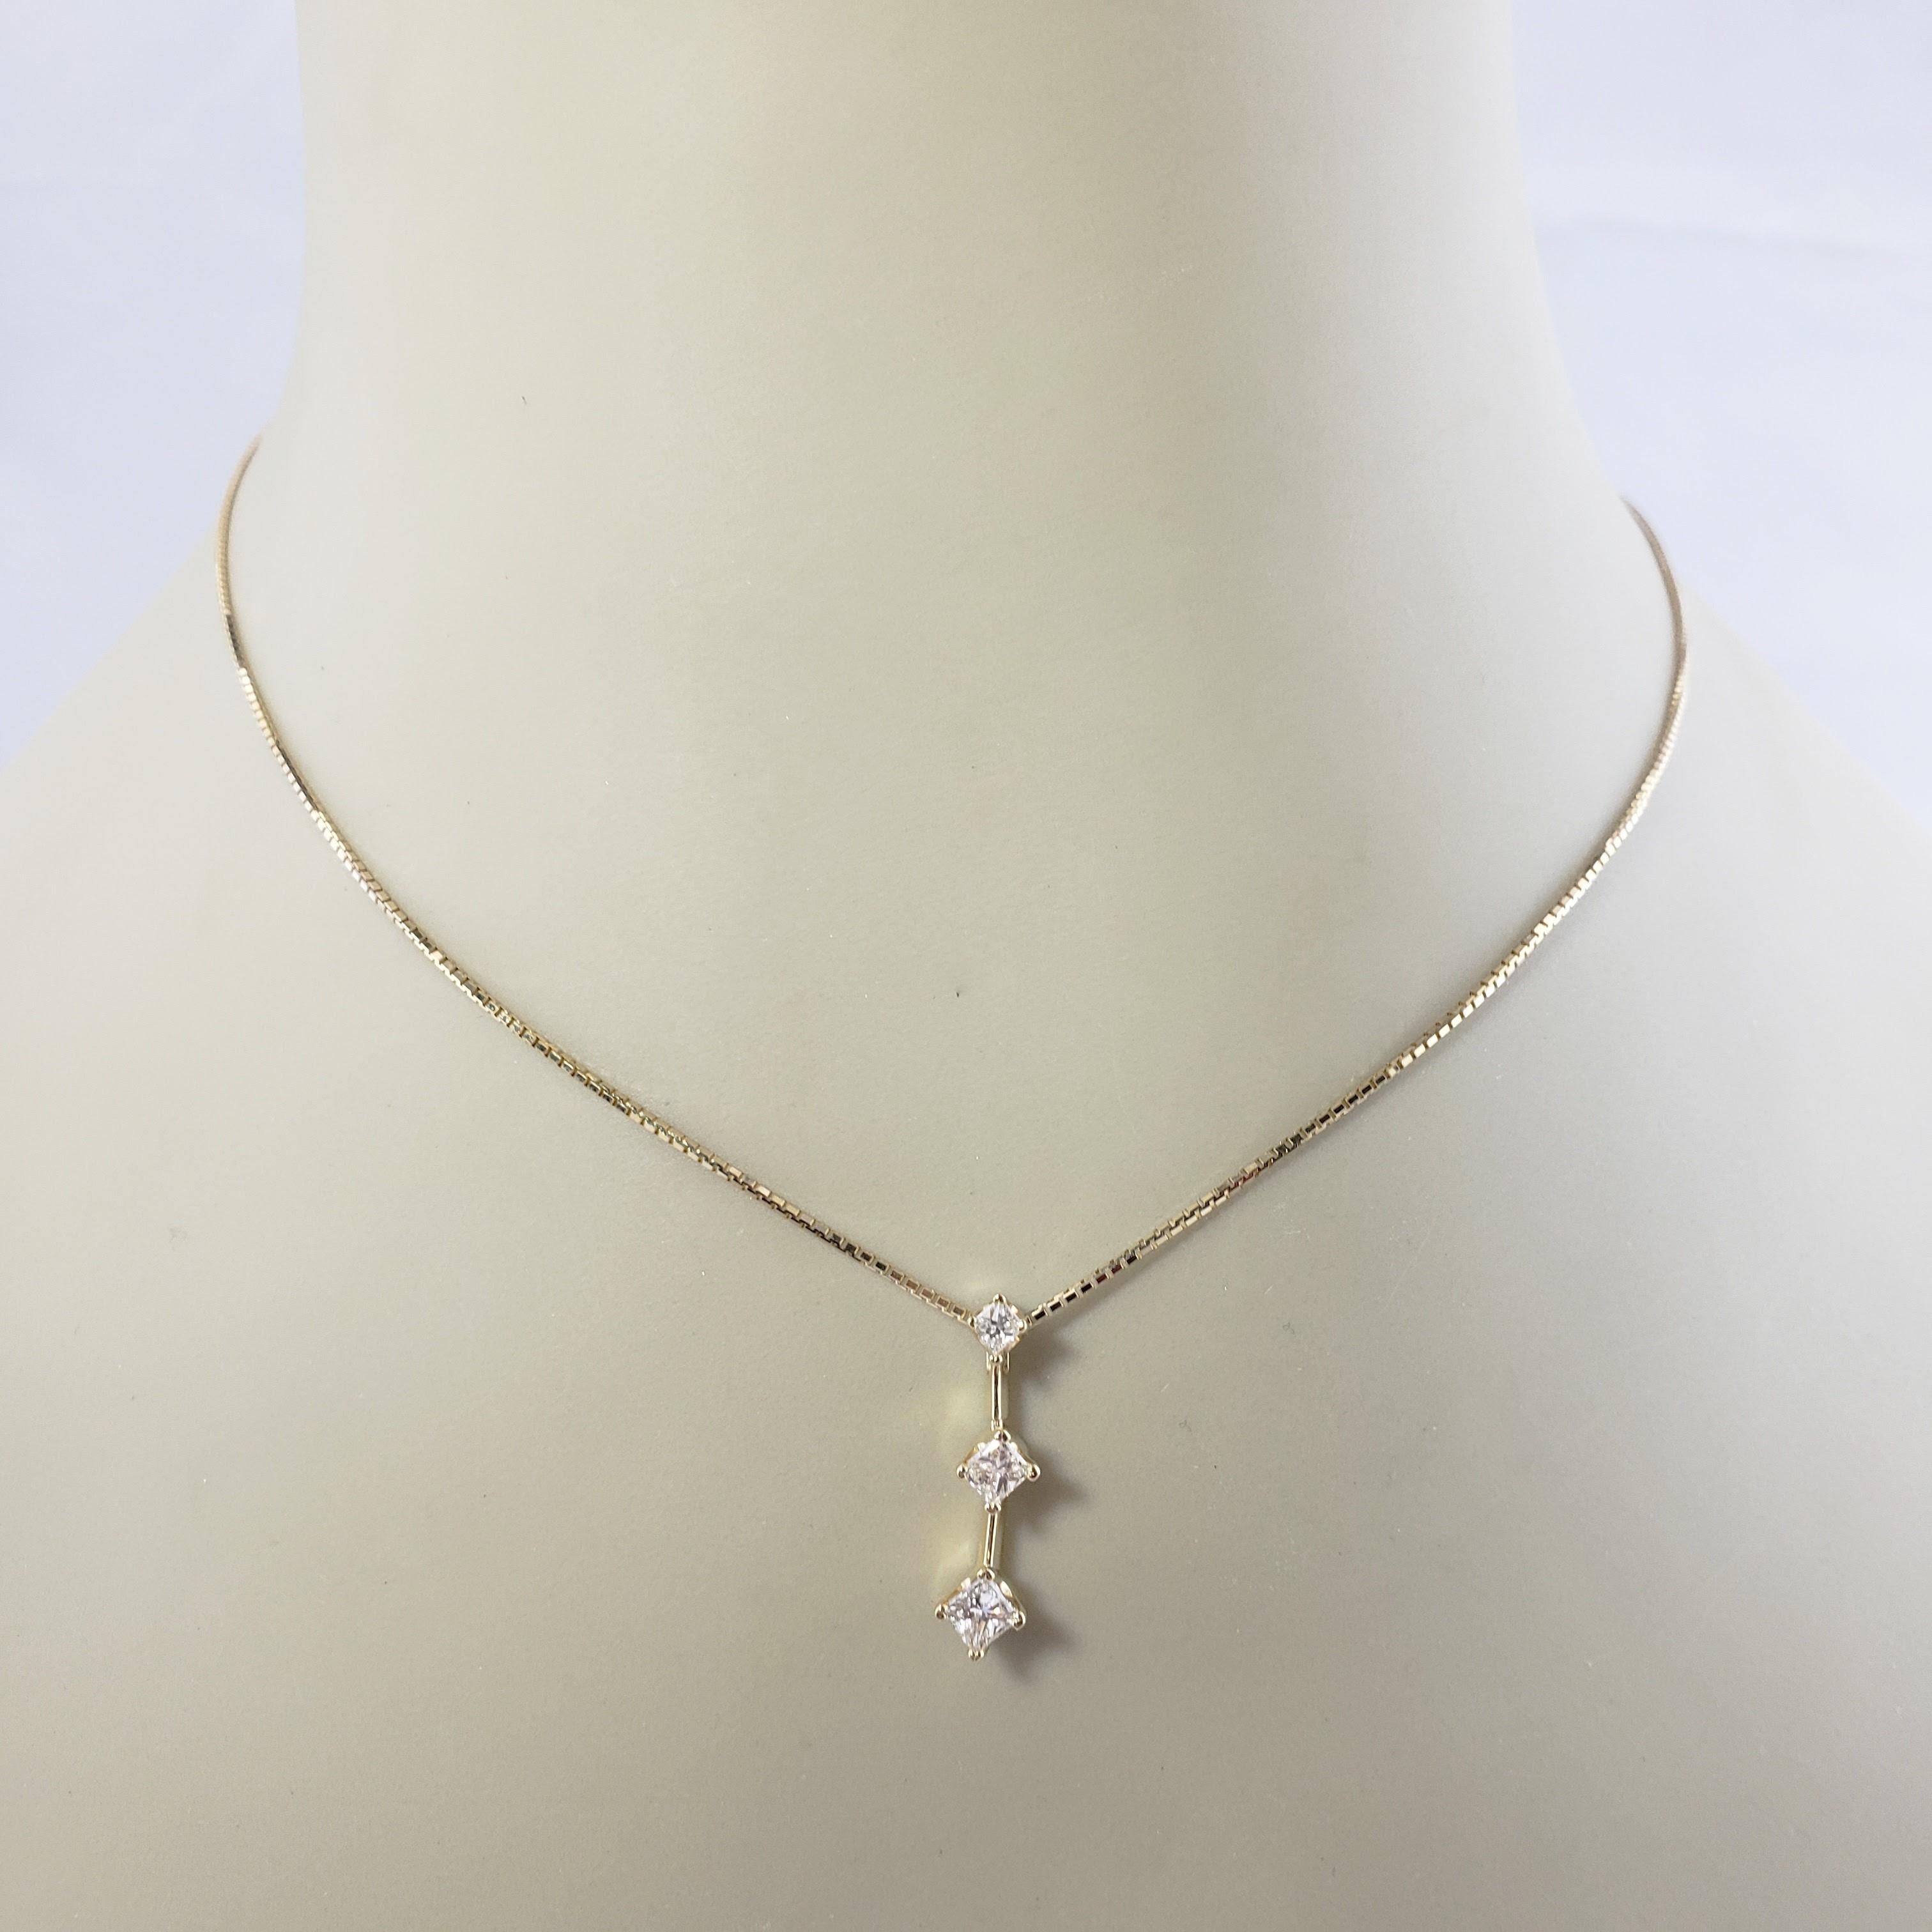 Vintage 14 Karat Yellow Gold and Diamond Pendant Necklace-

This sparkling pendant features 3 princess cut diamonds set in classic 14K yellow gold. Suspends from an elegant box chain.

Approximate total diamond weight: .45 ct. ( .20ct, .15ct, .10ct